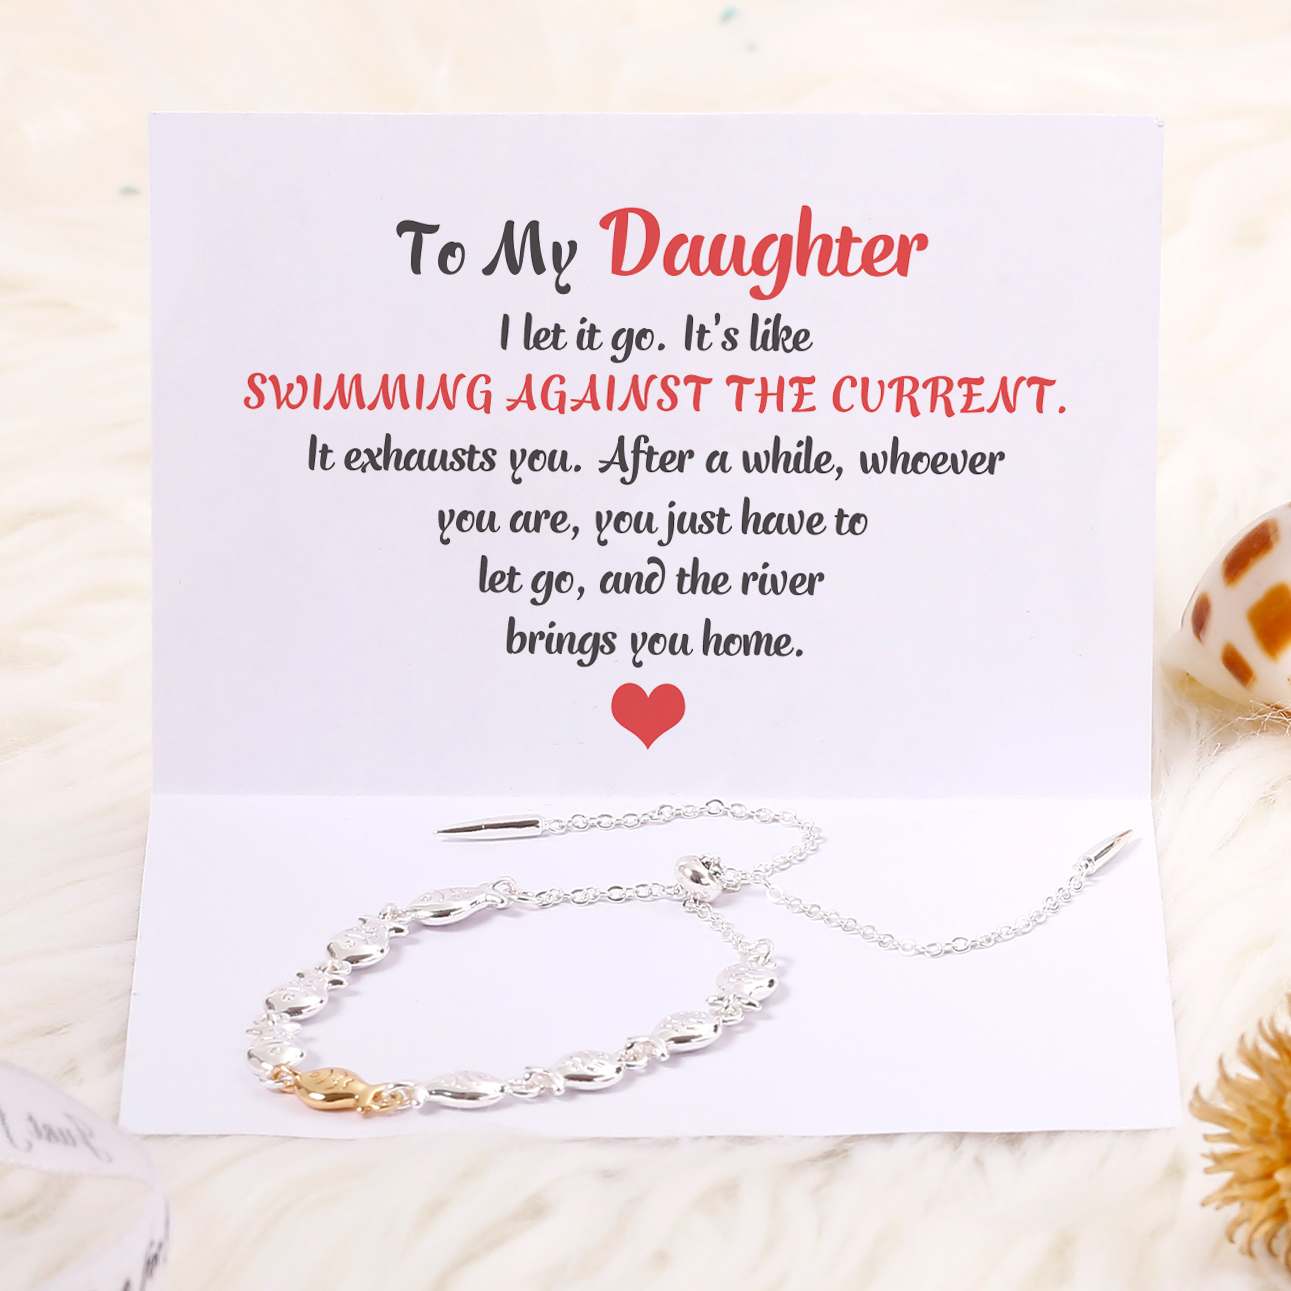 To My Daughter "SWIMMING AGAINST THE CURRENT" Small Fish Bracelet - SARAH'S WHISPER